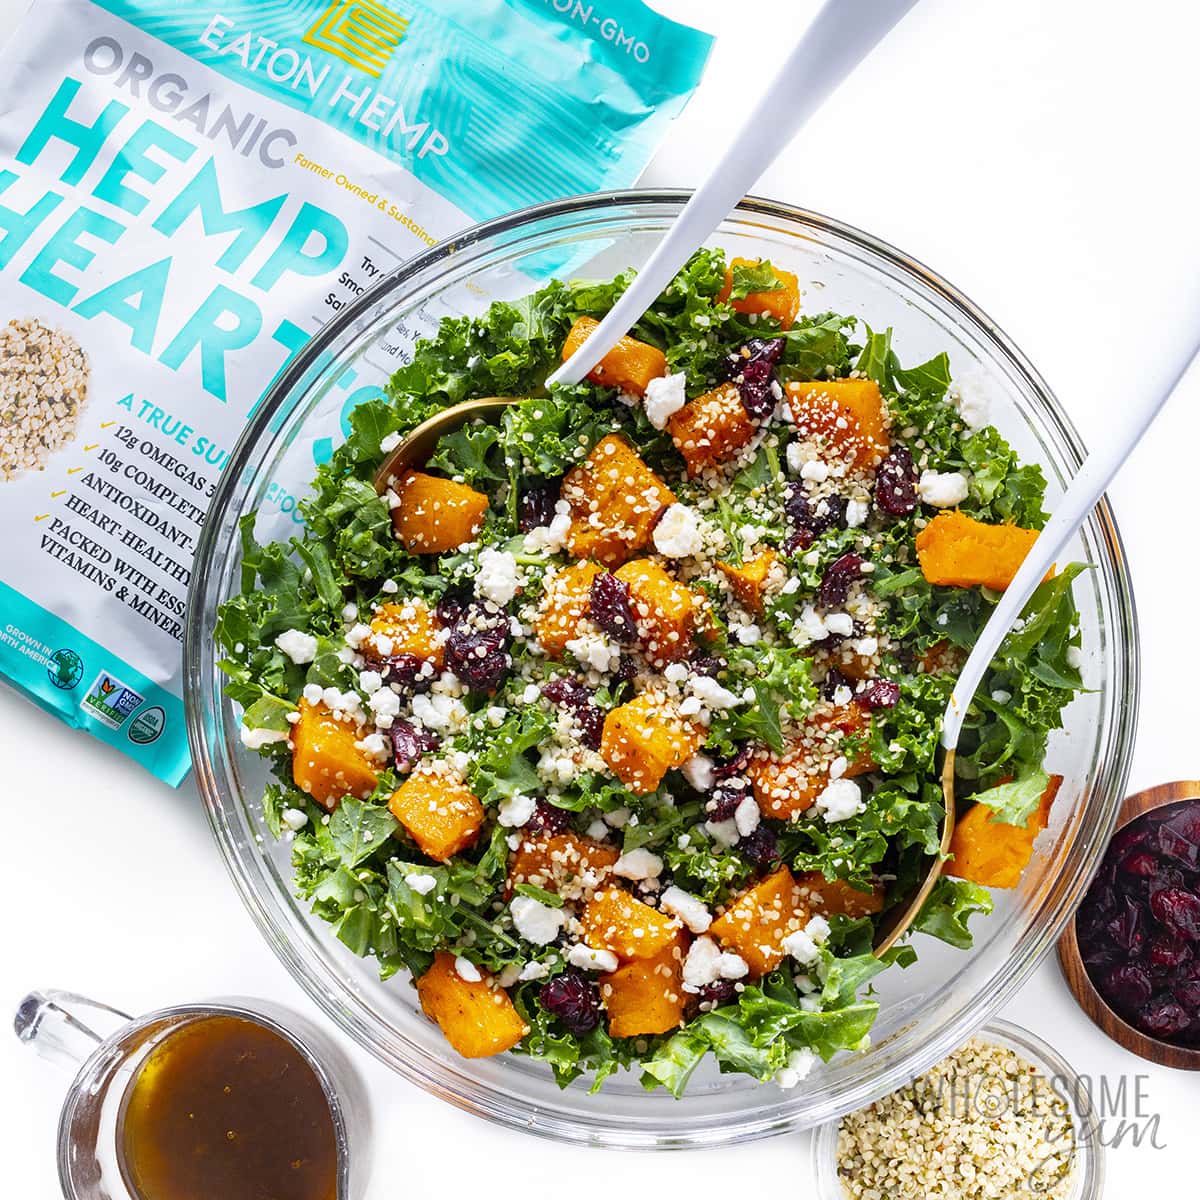 Salad ingredients in a bowl with Eaton Hemp Hearts.